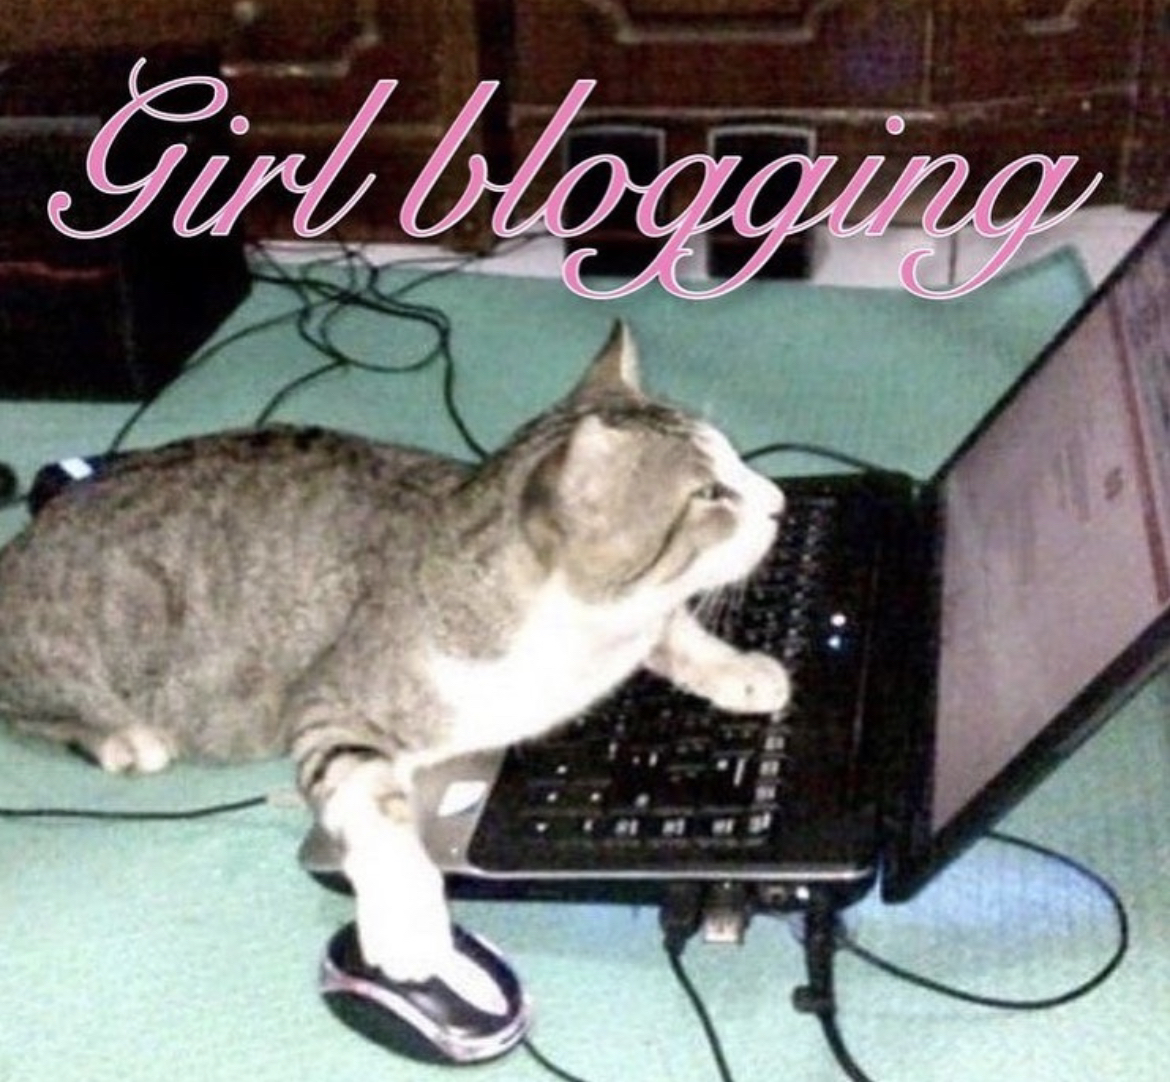 AN IMAGE OF A GRAY TABBY CAT ON A LAPTOP THAT'S CAPTIONED 'GIRLBLOGGING' IN A PINK, SPARKLY, CURSIVE FONT.